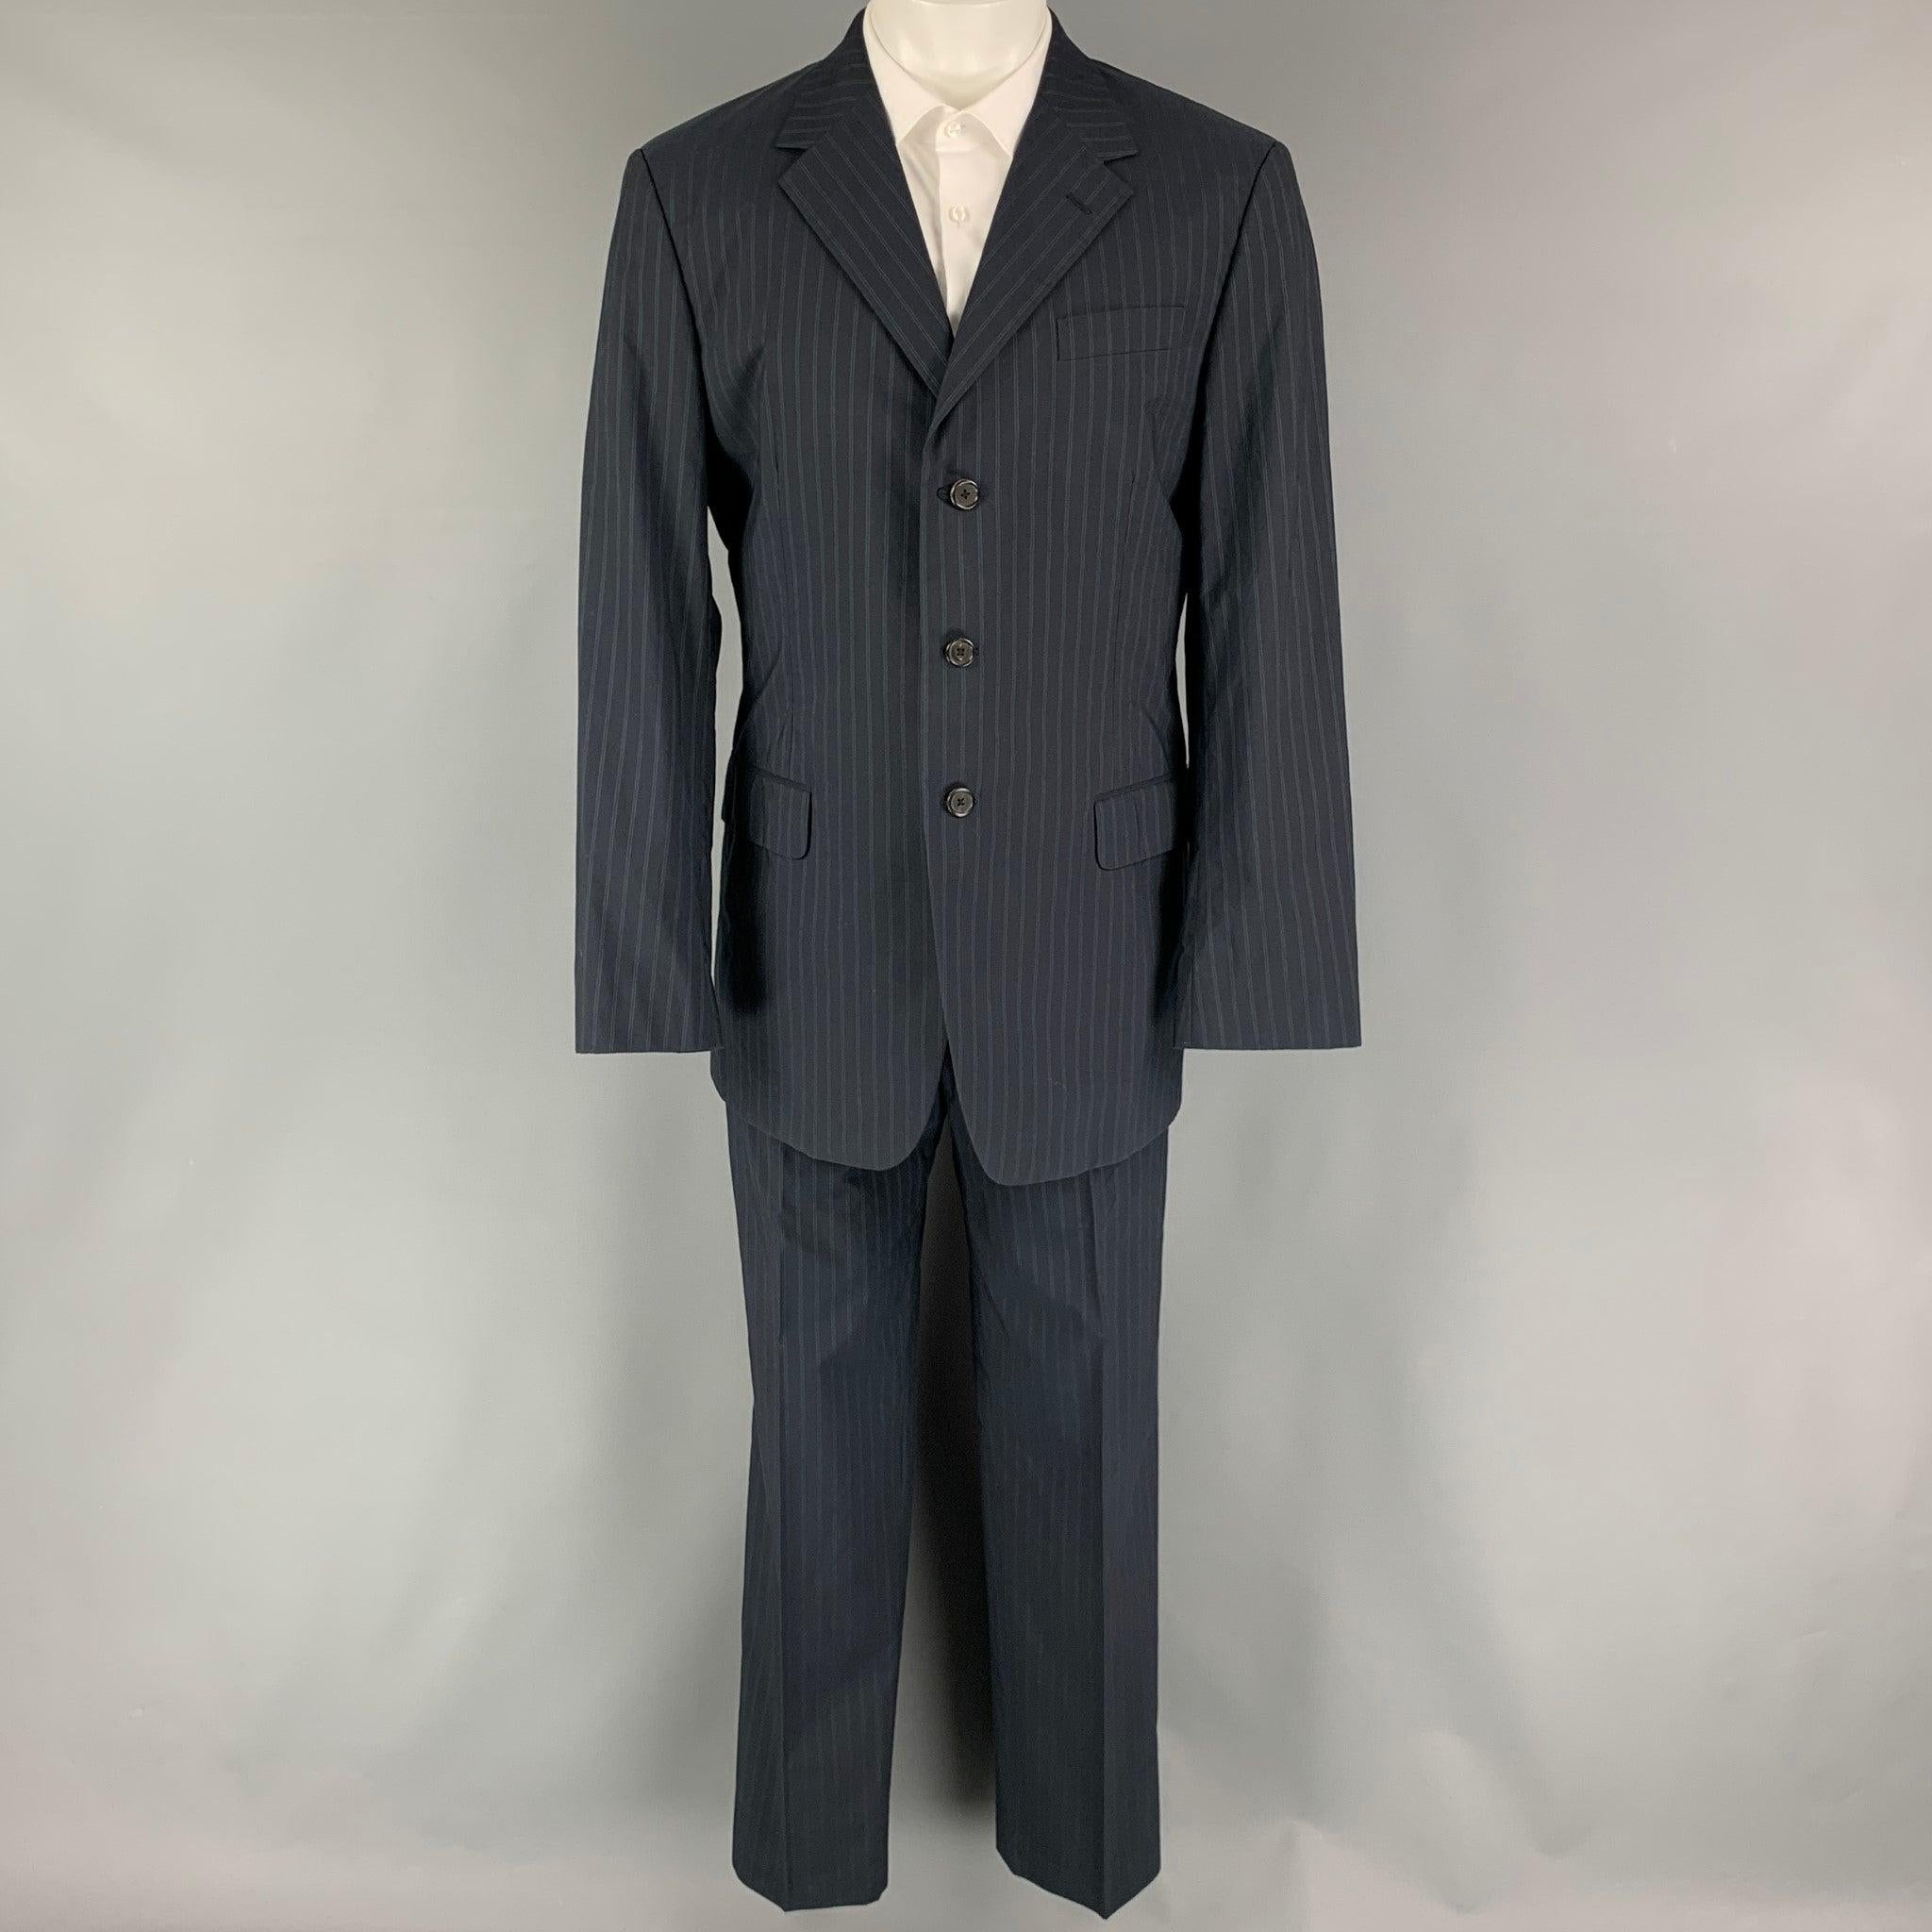 PRADA suit comes in a navy stripped cotton woven material with a full liner and includes a single breasted, three button sport coat with a notch lapel and matching flat front trousers. Made in Italy.Excellent Pre-Owned Condition. 

Marked:   50